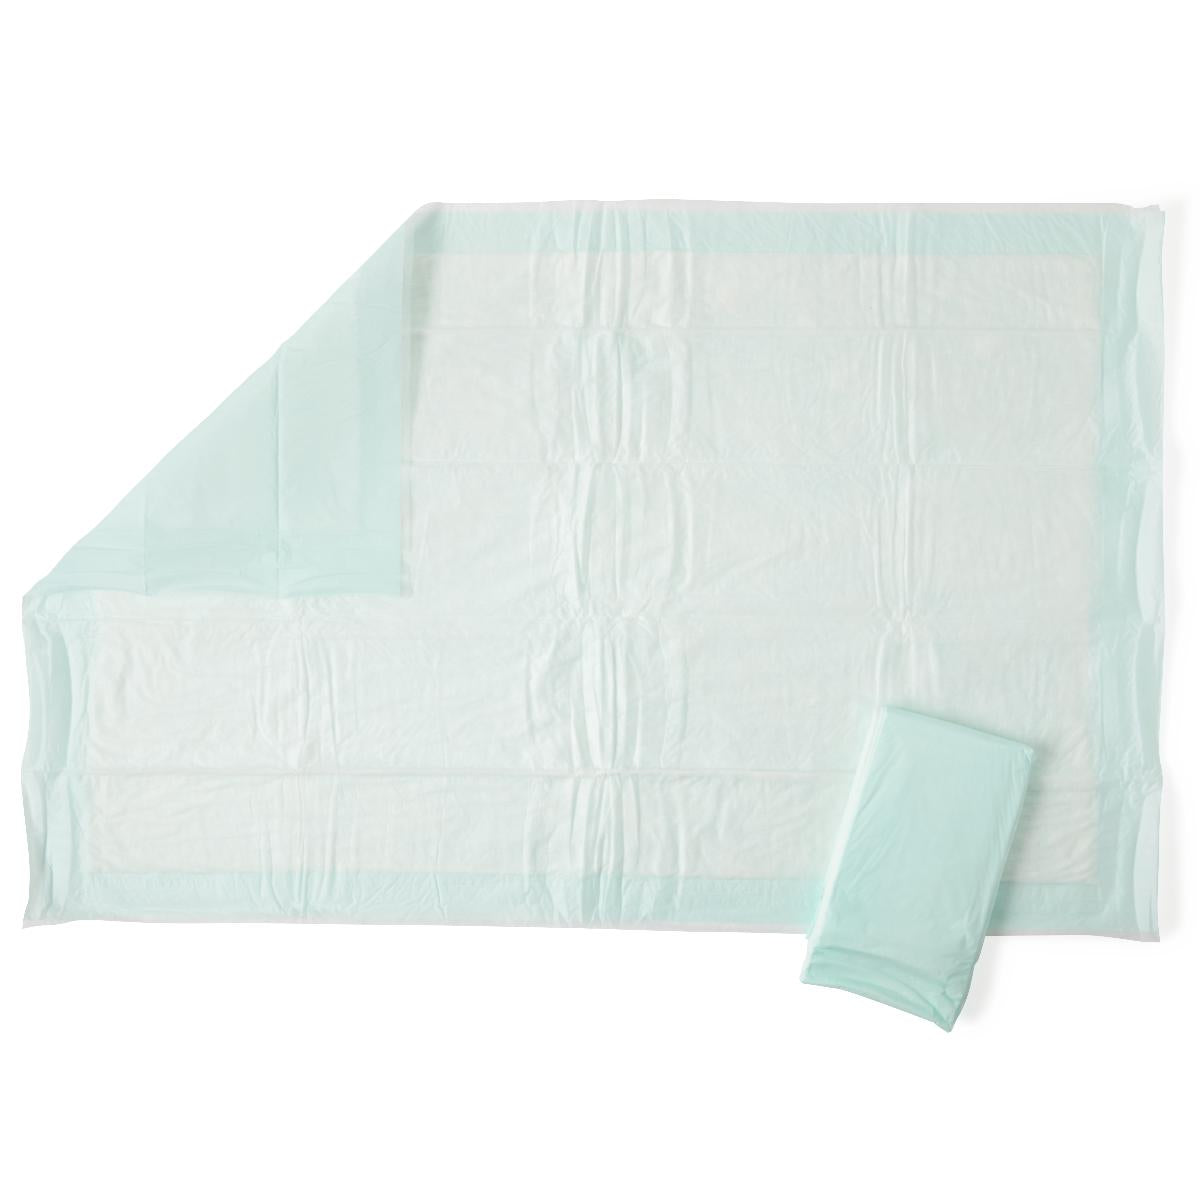 150 Each-Case / Green / 23" X 36" Incontinence - MEDLINE - Wasatch Medical Supply